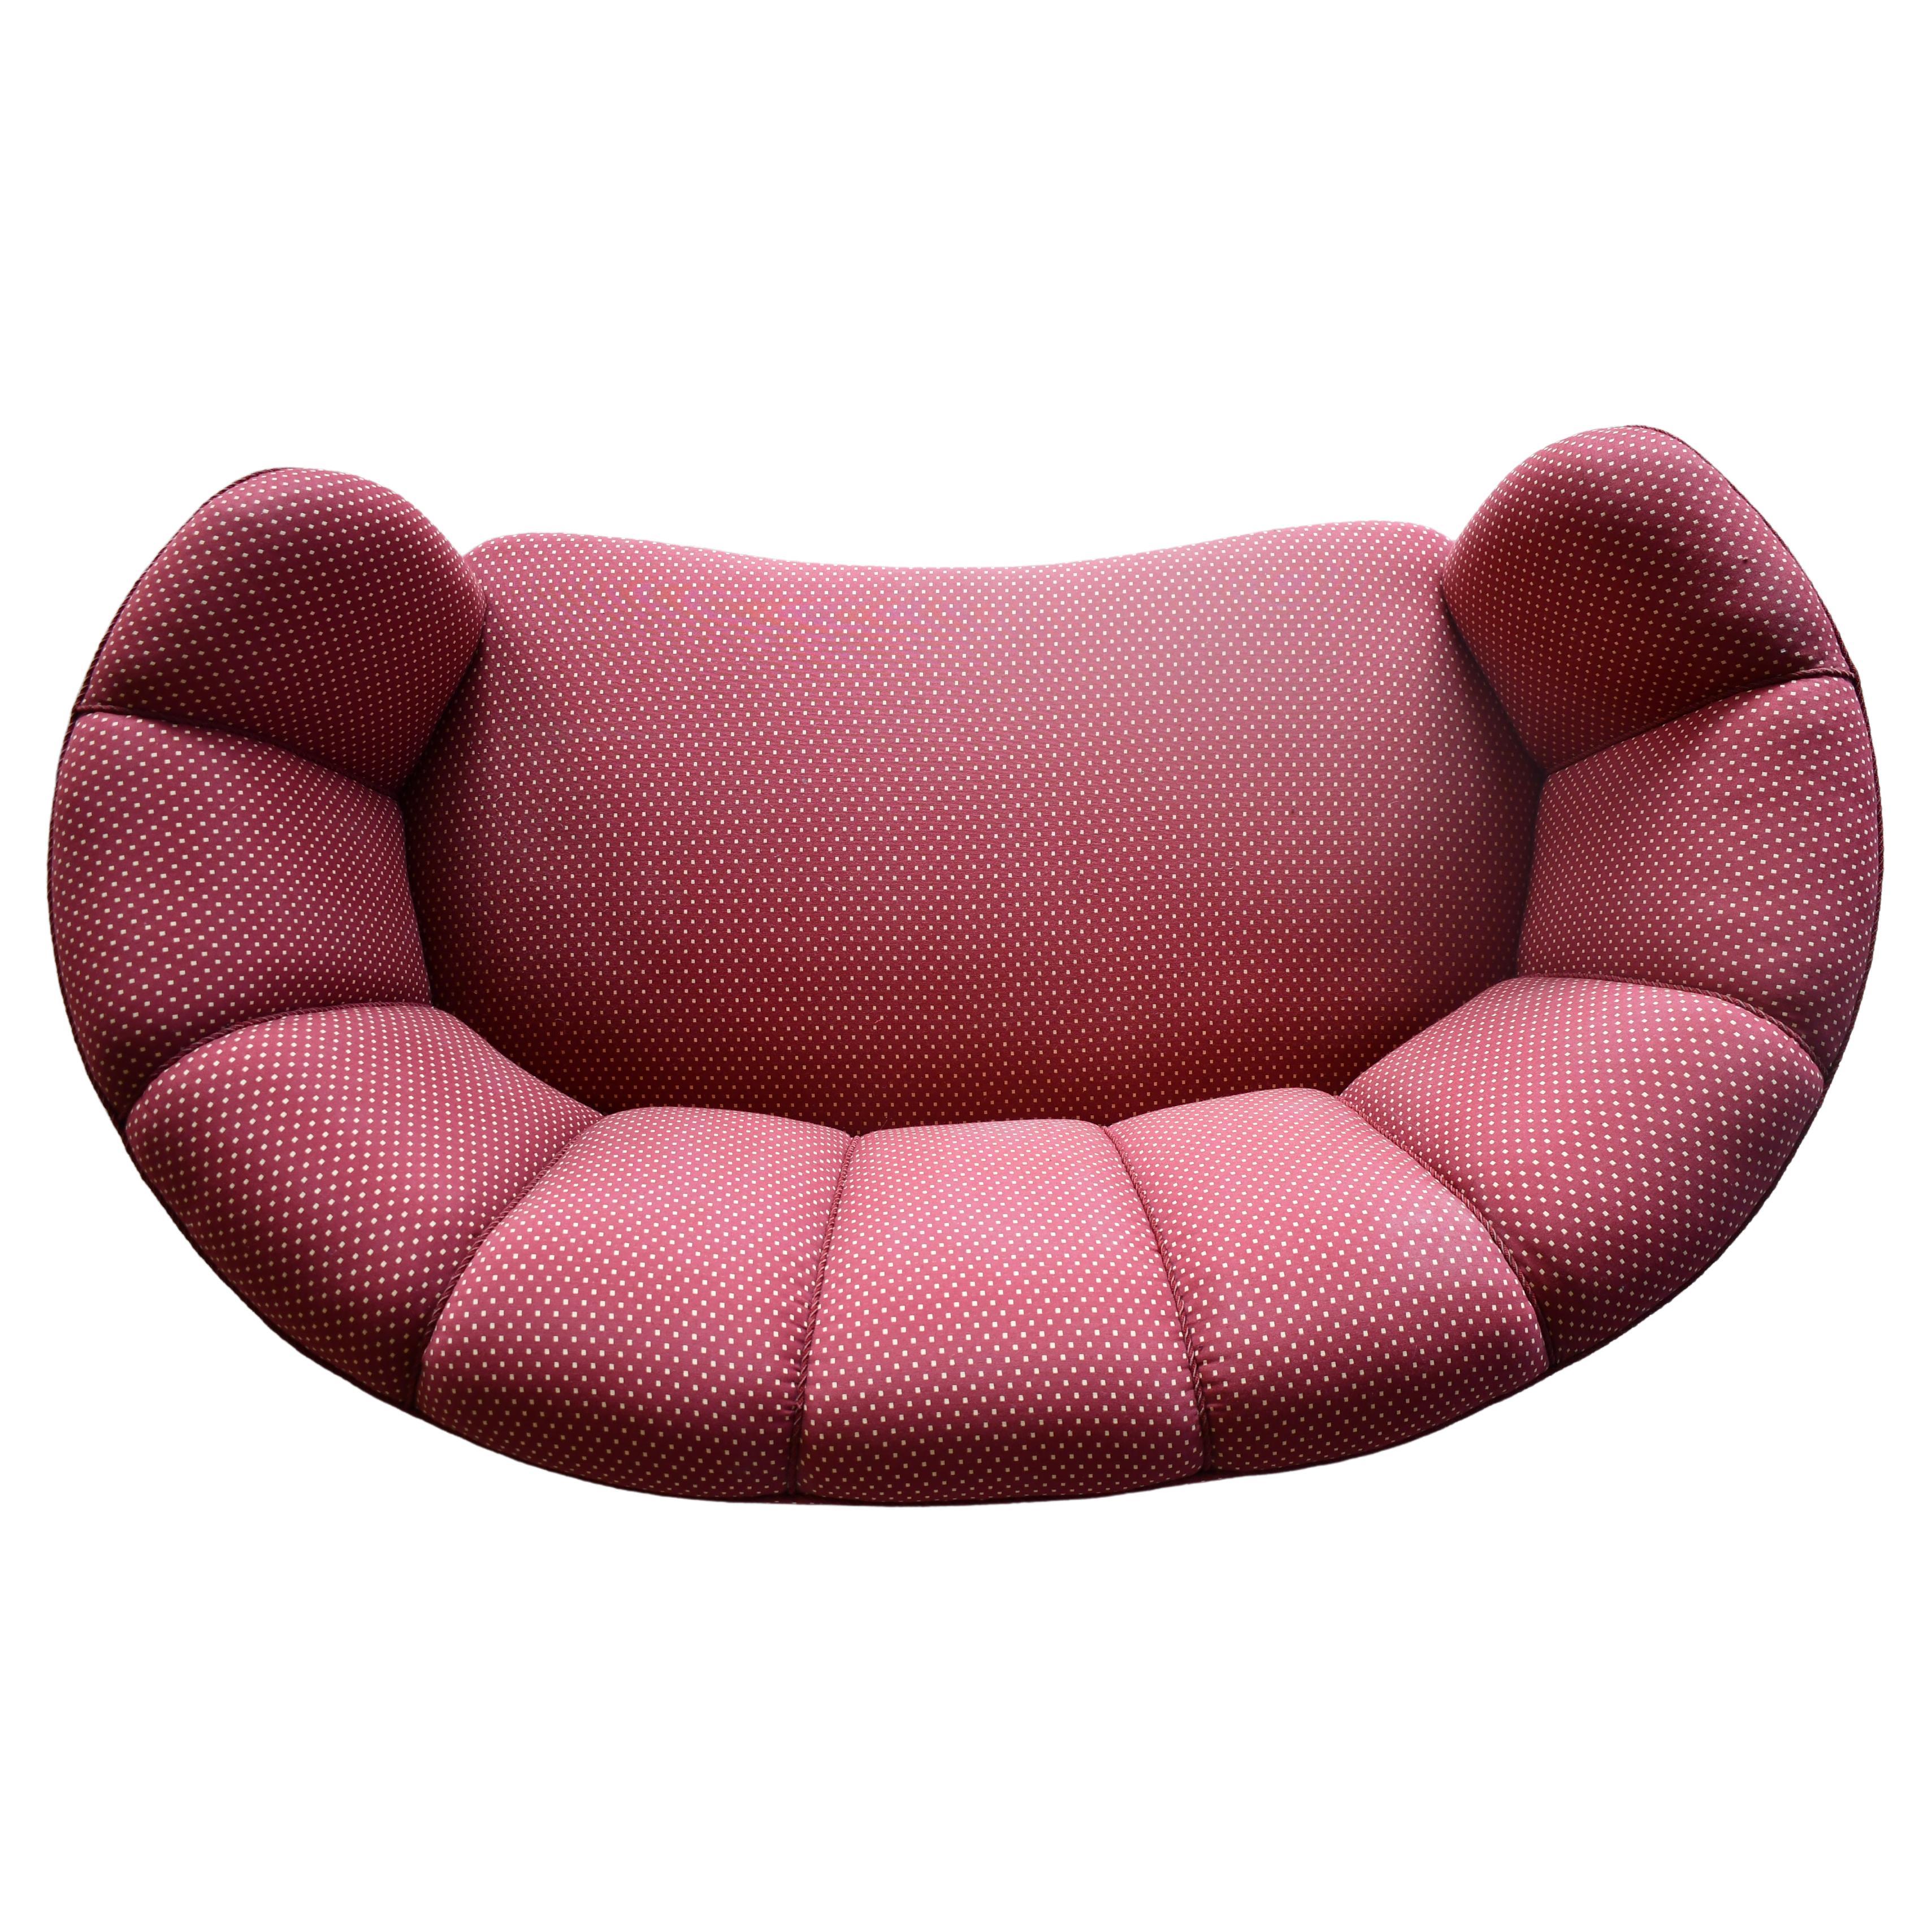 Danish "Banan" Curved Sofa from the 1940s For Sale